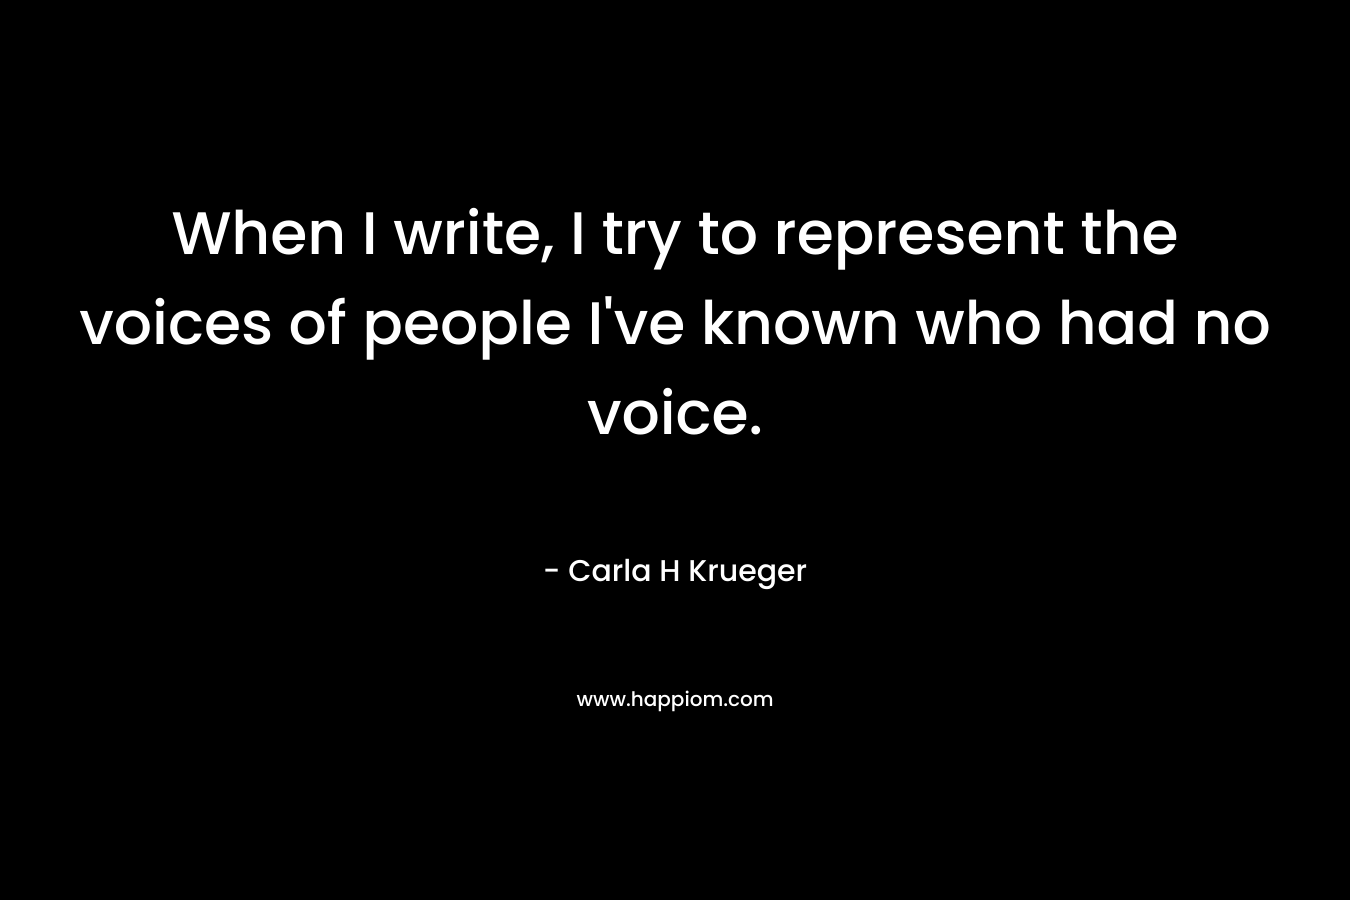 When I write, I try to represent the voices of people I’ve known who had no voice. – Carla H Krueger